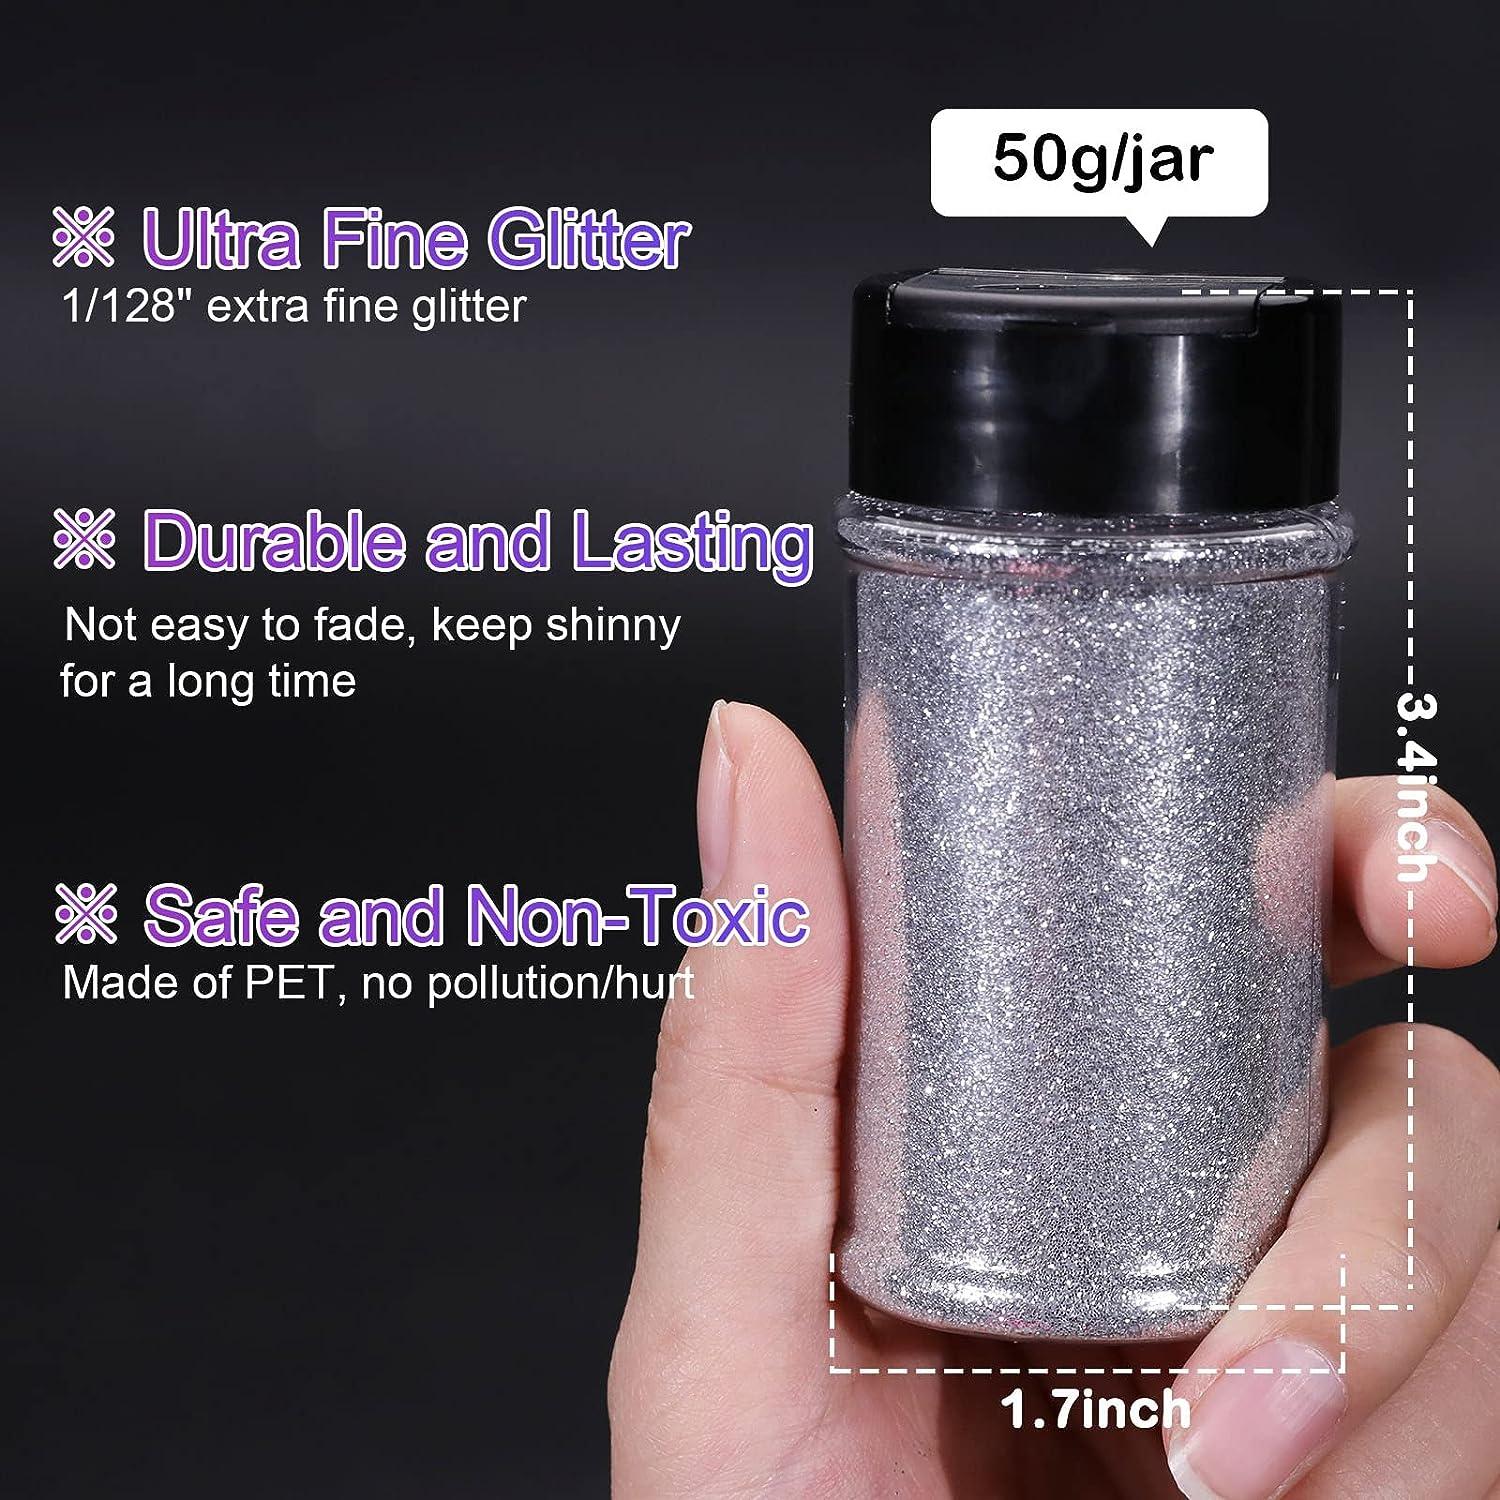  HTVRONT Holographic Ultra Fine Glitter Powder - Blue Resin  Glitter 50g/1.76oz, Double-Duty Cap Craft Glitter Powder, Non-Toxic Glitter  for Slime, Nails, Candle Making, Crafts : Arts, Crafts & Sewing